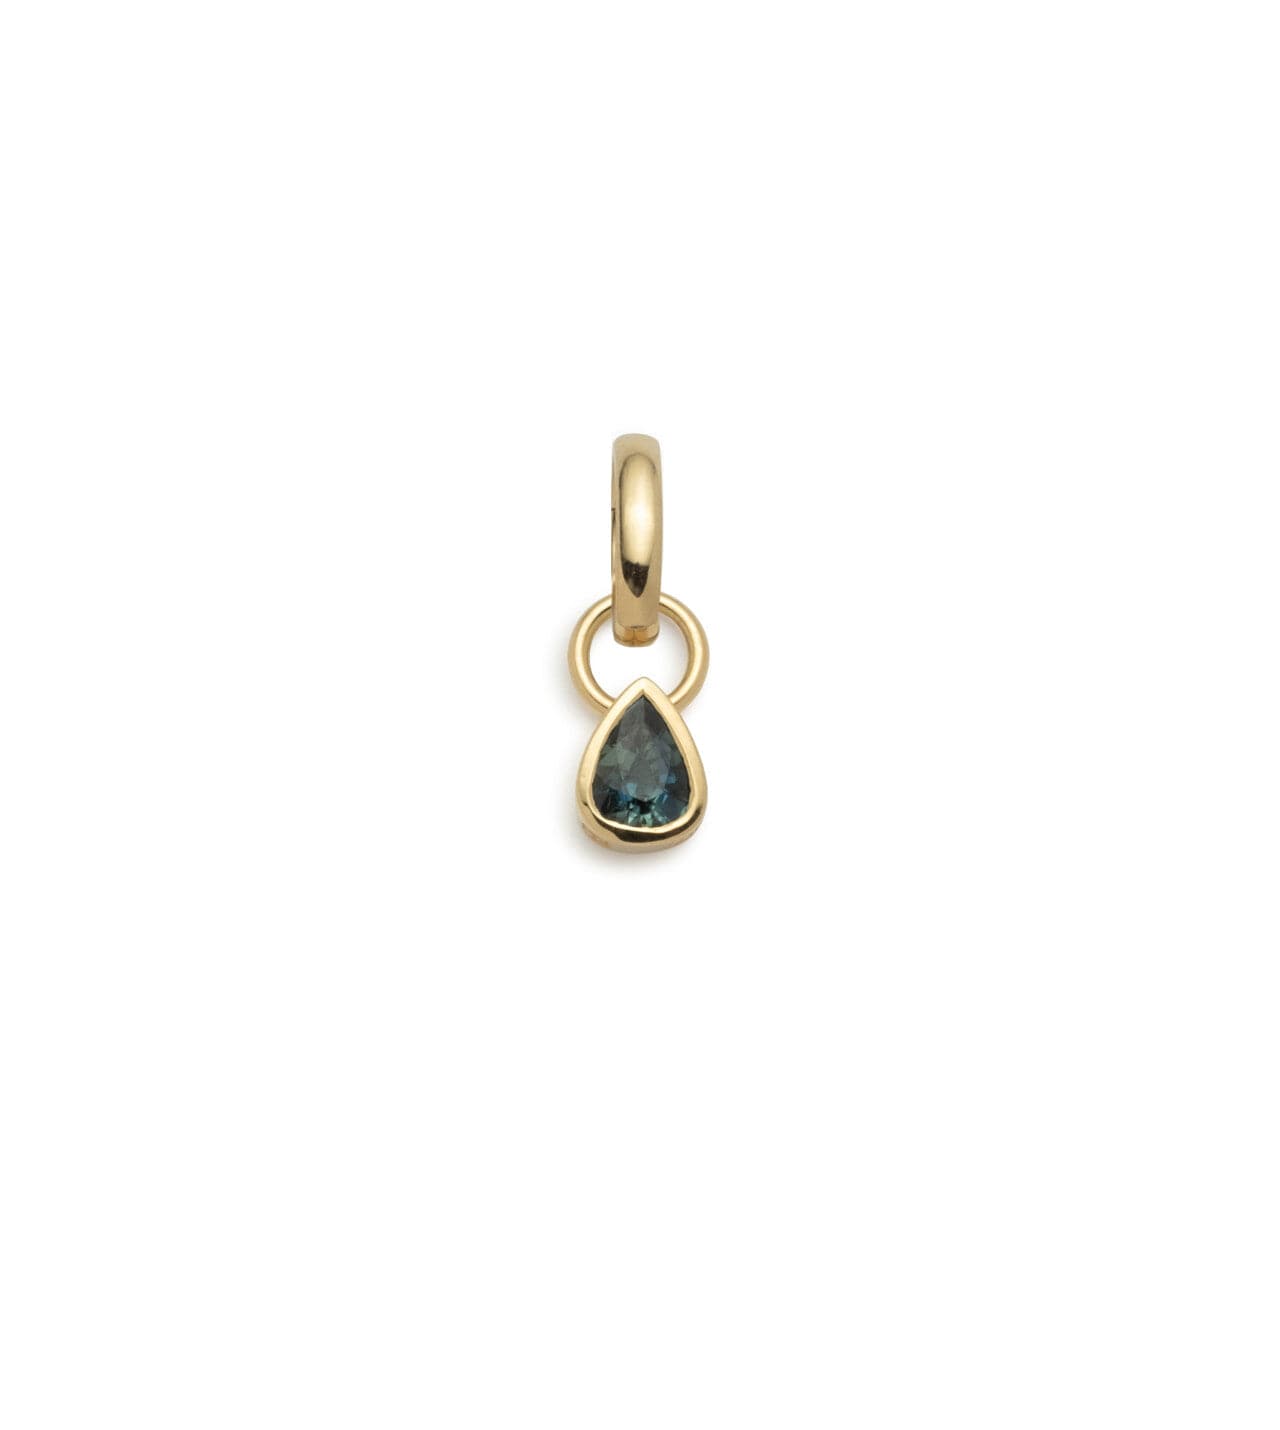 Forever & Always a Pair - Love : 0.45ct Gemstone Pear Pendant with Oval Push Gate